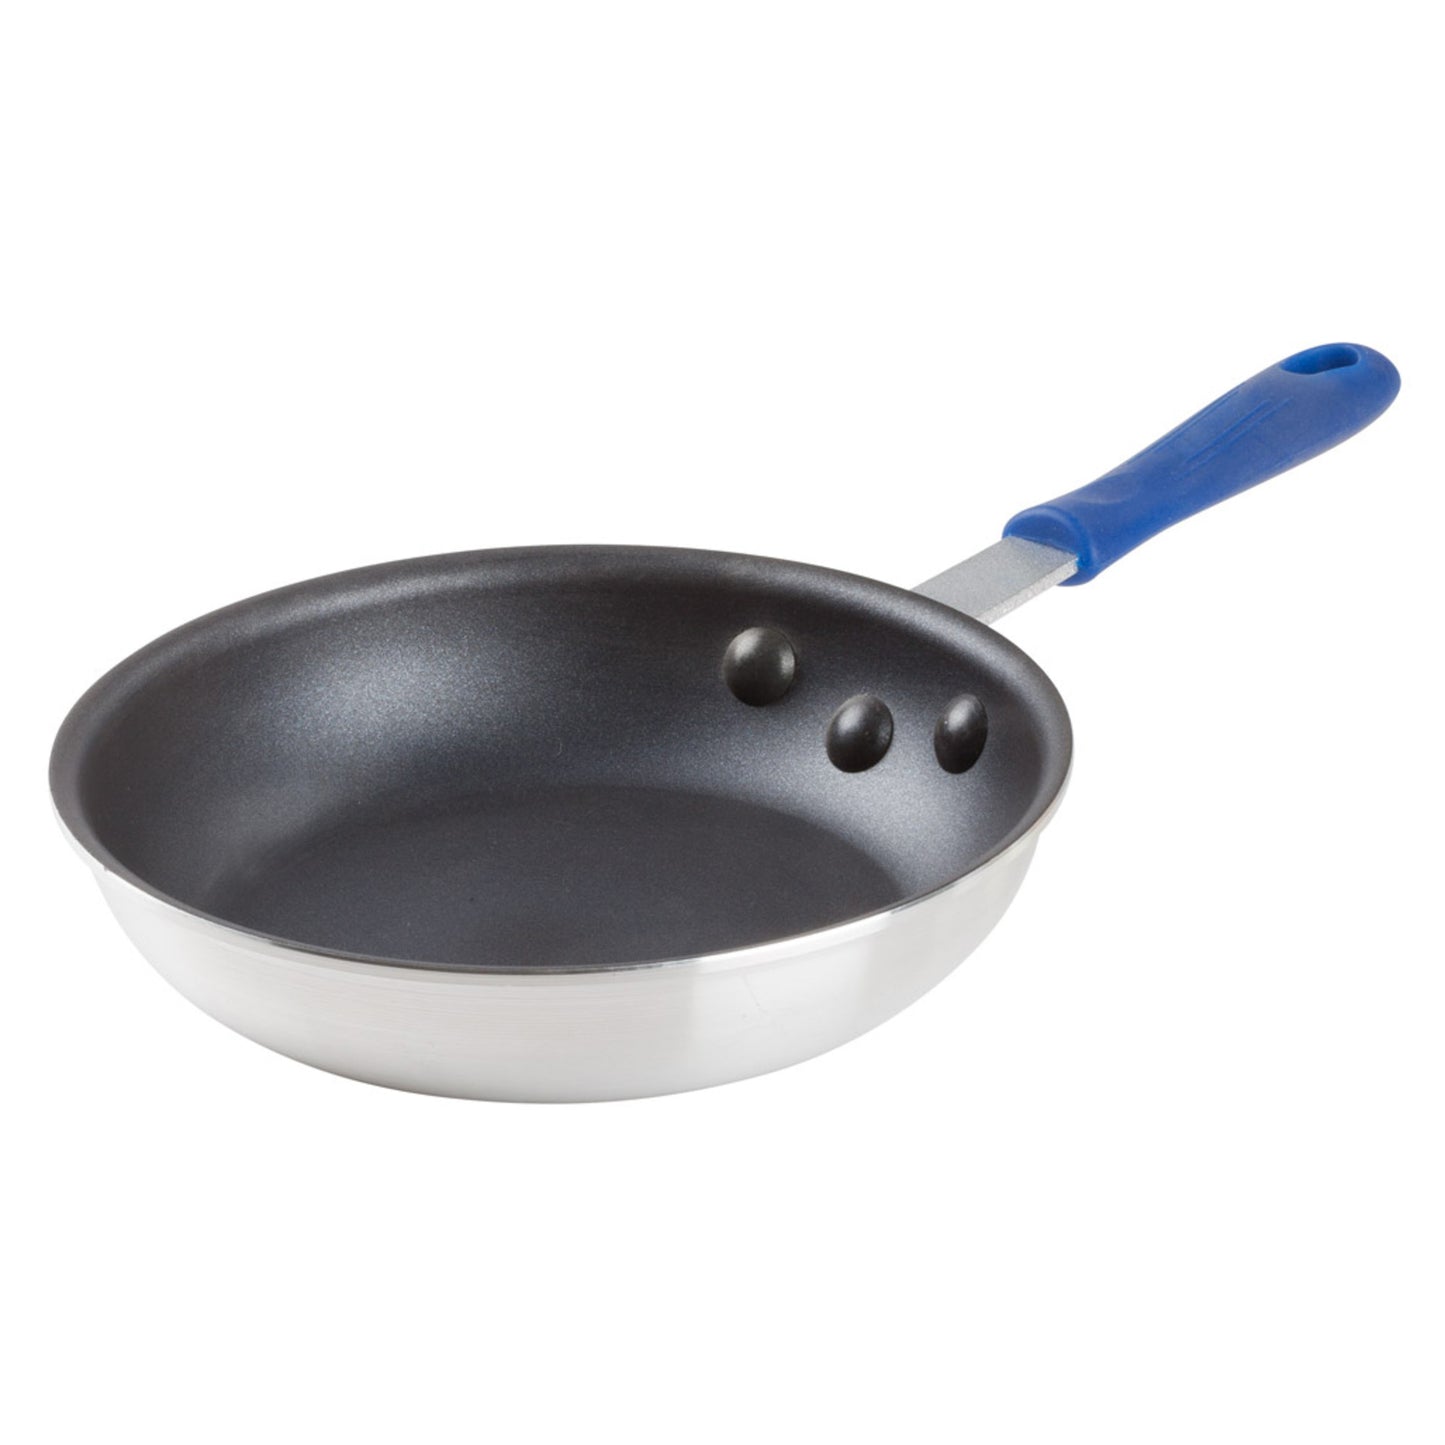 AFPI-8NH - Induction Ready Aluminum Fry Pan, Stainless Steel Bottom, Non-Stick - 8" Dia